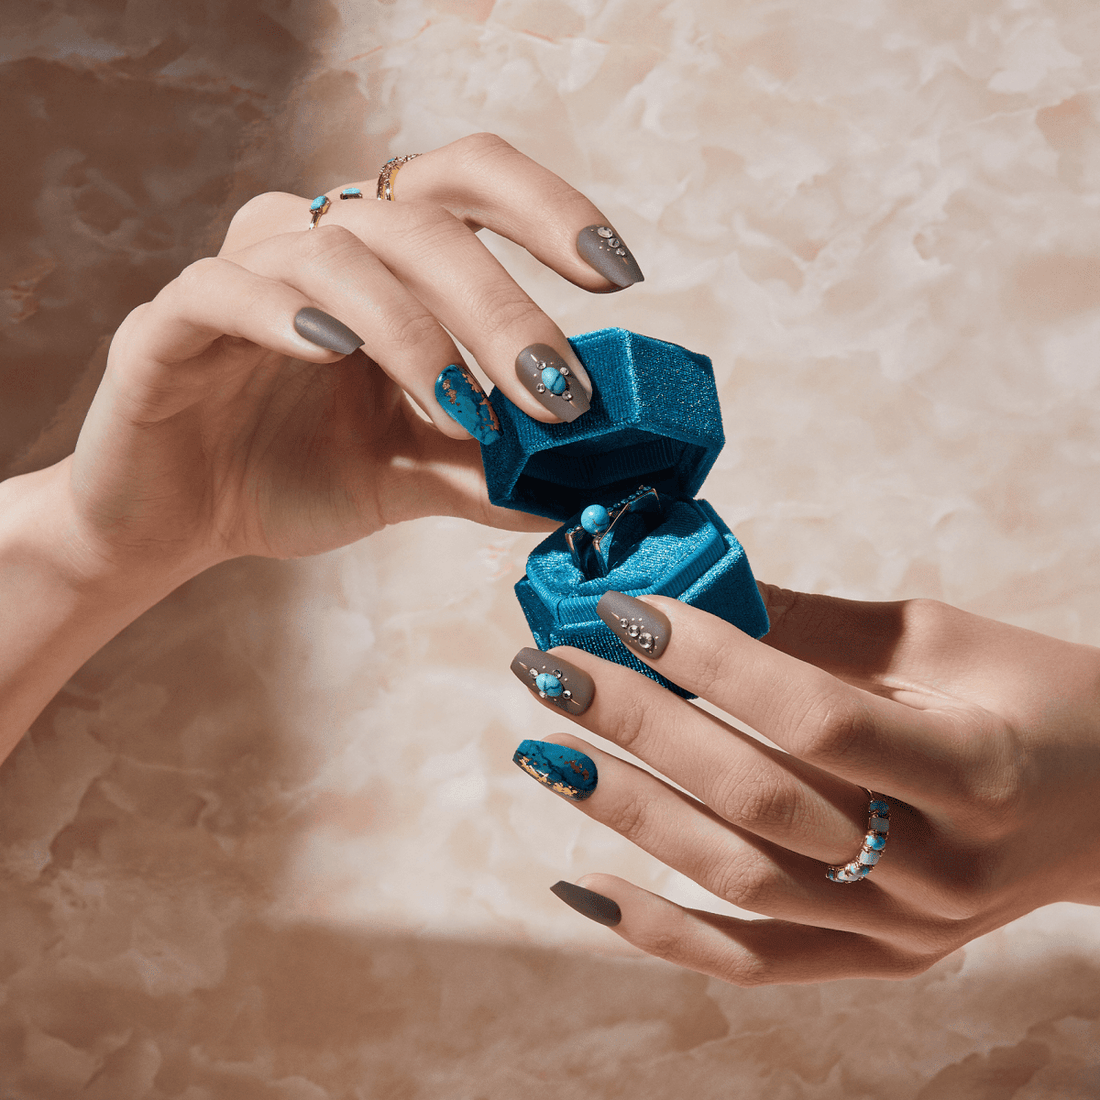 imPRESS Press-on Manicure Birthstone Collection - Turquoise